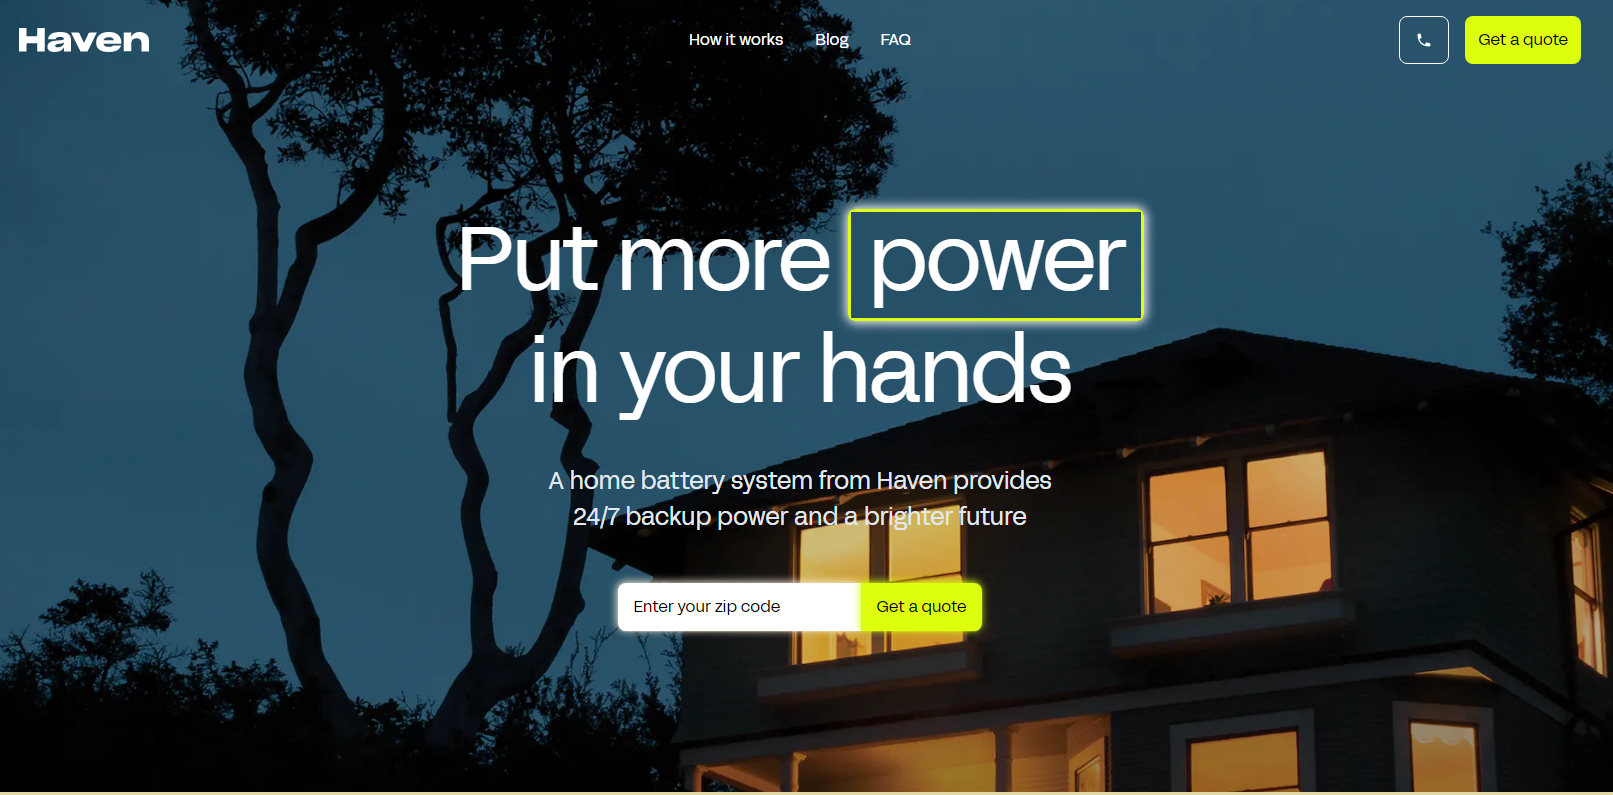 Haven Energy Raises $4.2 Million in Seed Funding to Accelerate Adoption of Home Energy Storage.